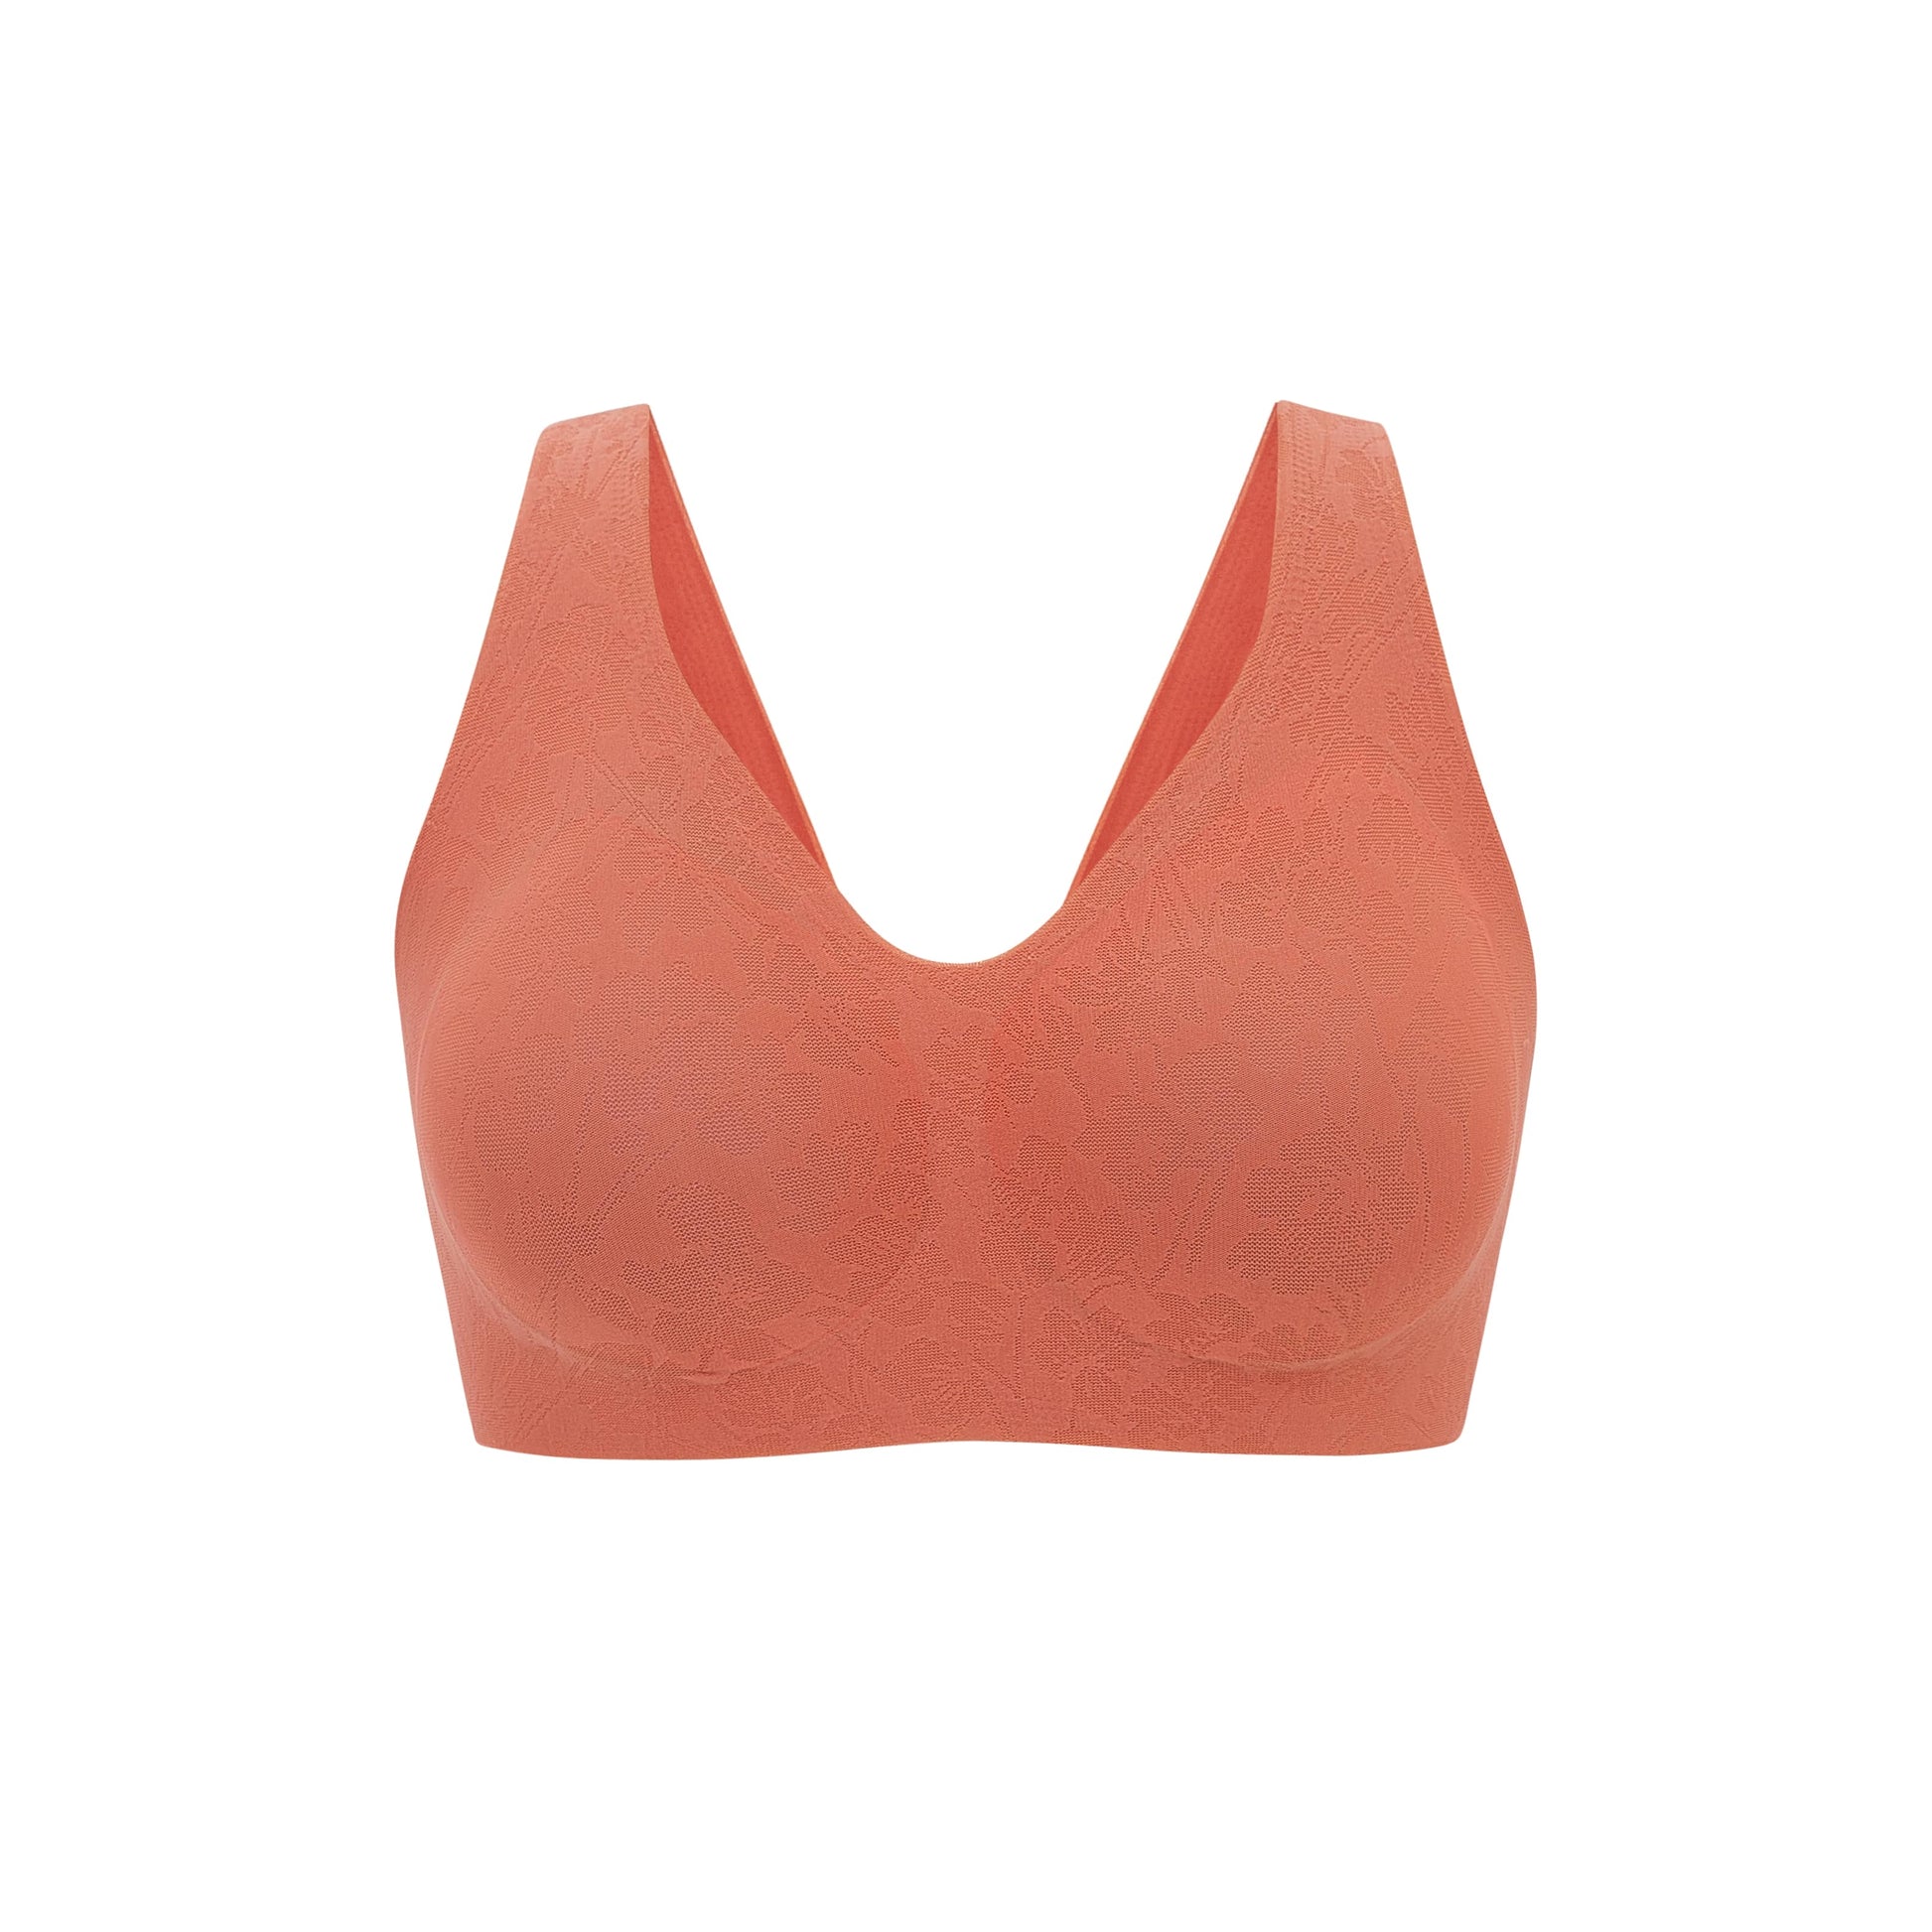 Barely There Feels, Everyday Comfort, Red Mesh Bra